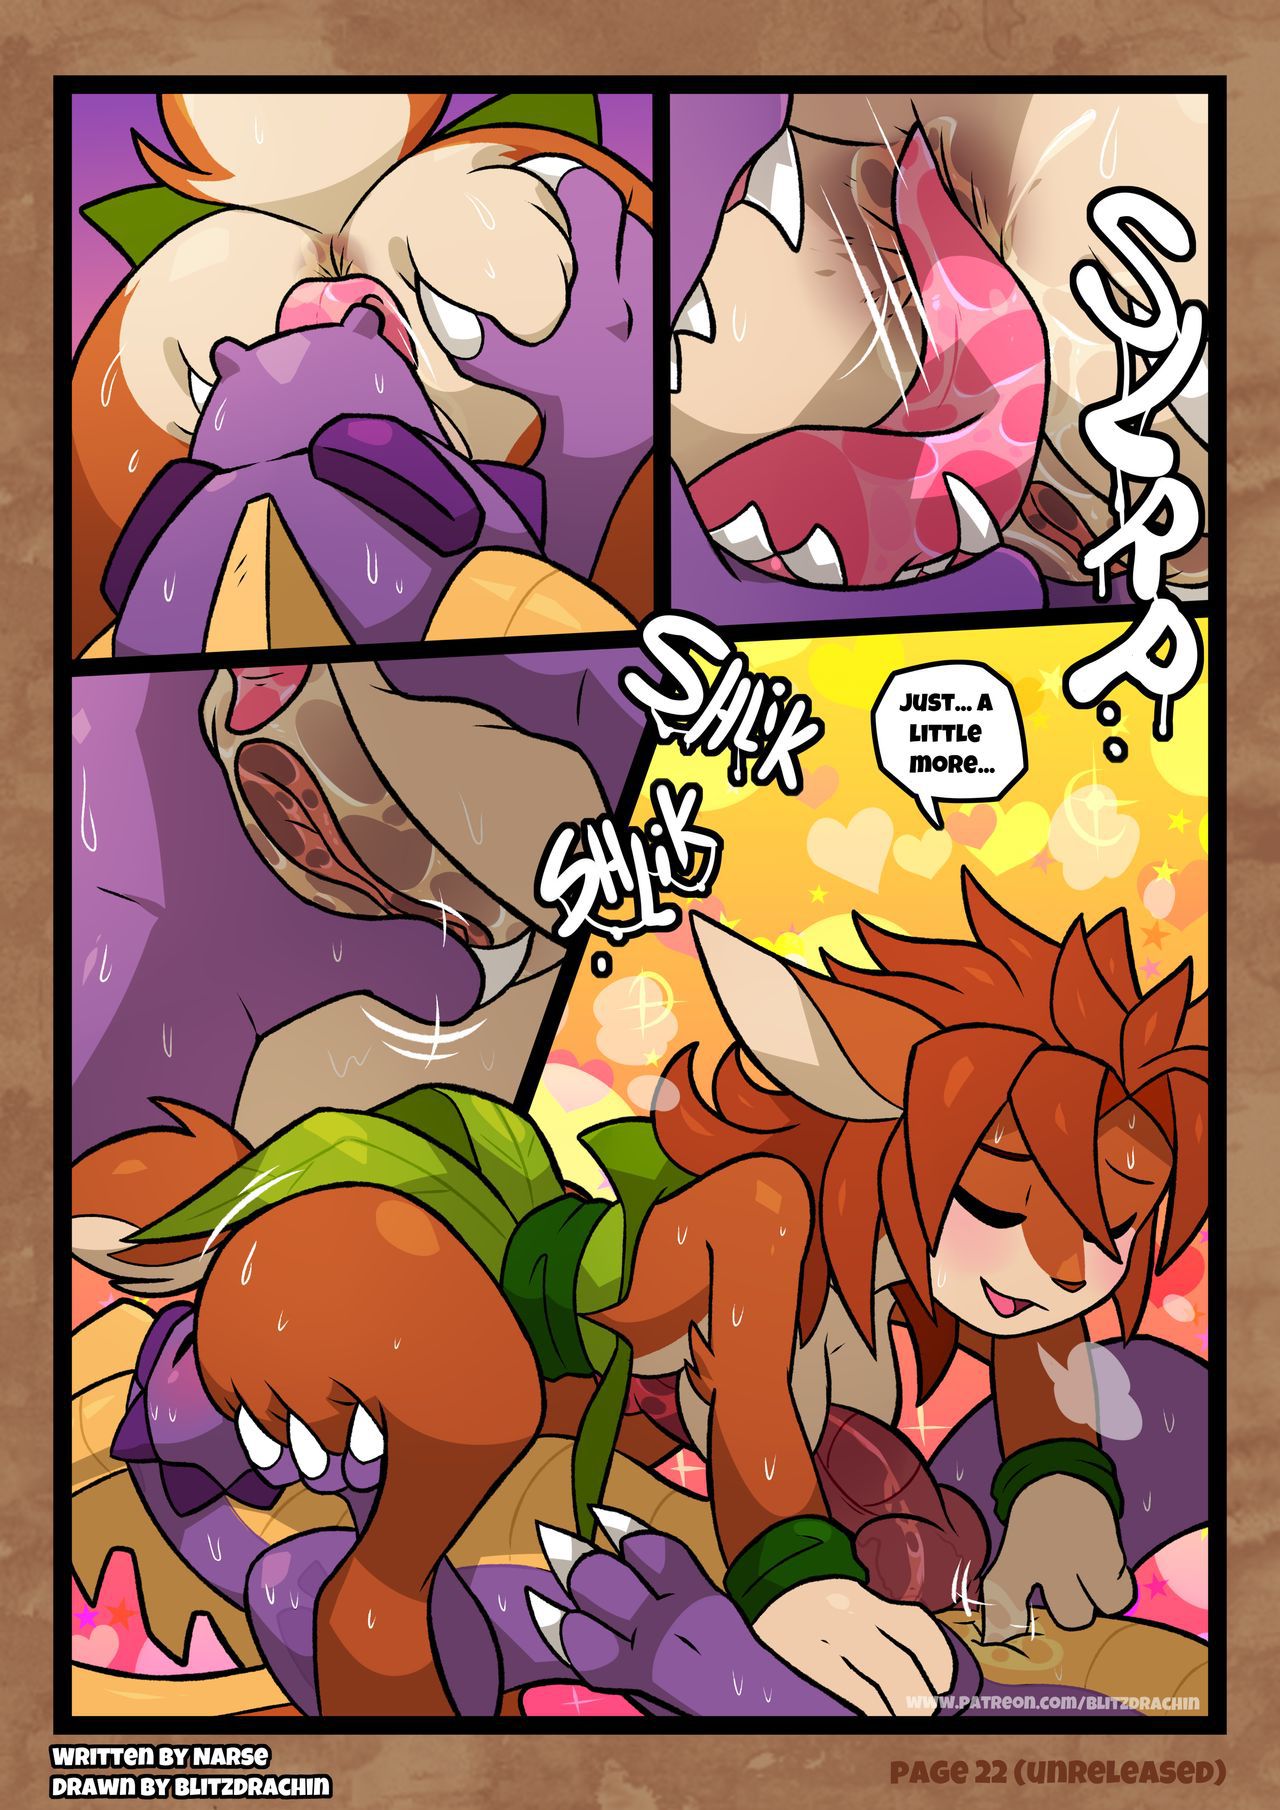 [Blitzdrachin] A Time with the Hero (Spyro the Dragon) [Ongoing] 24